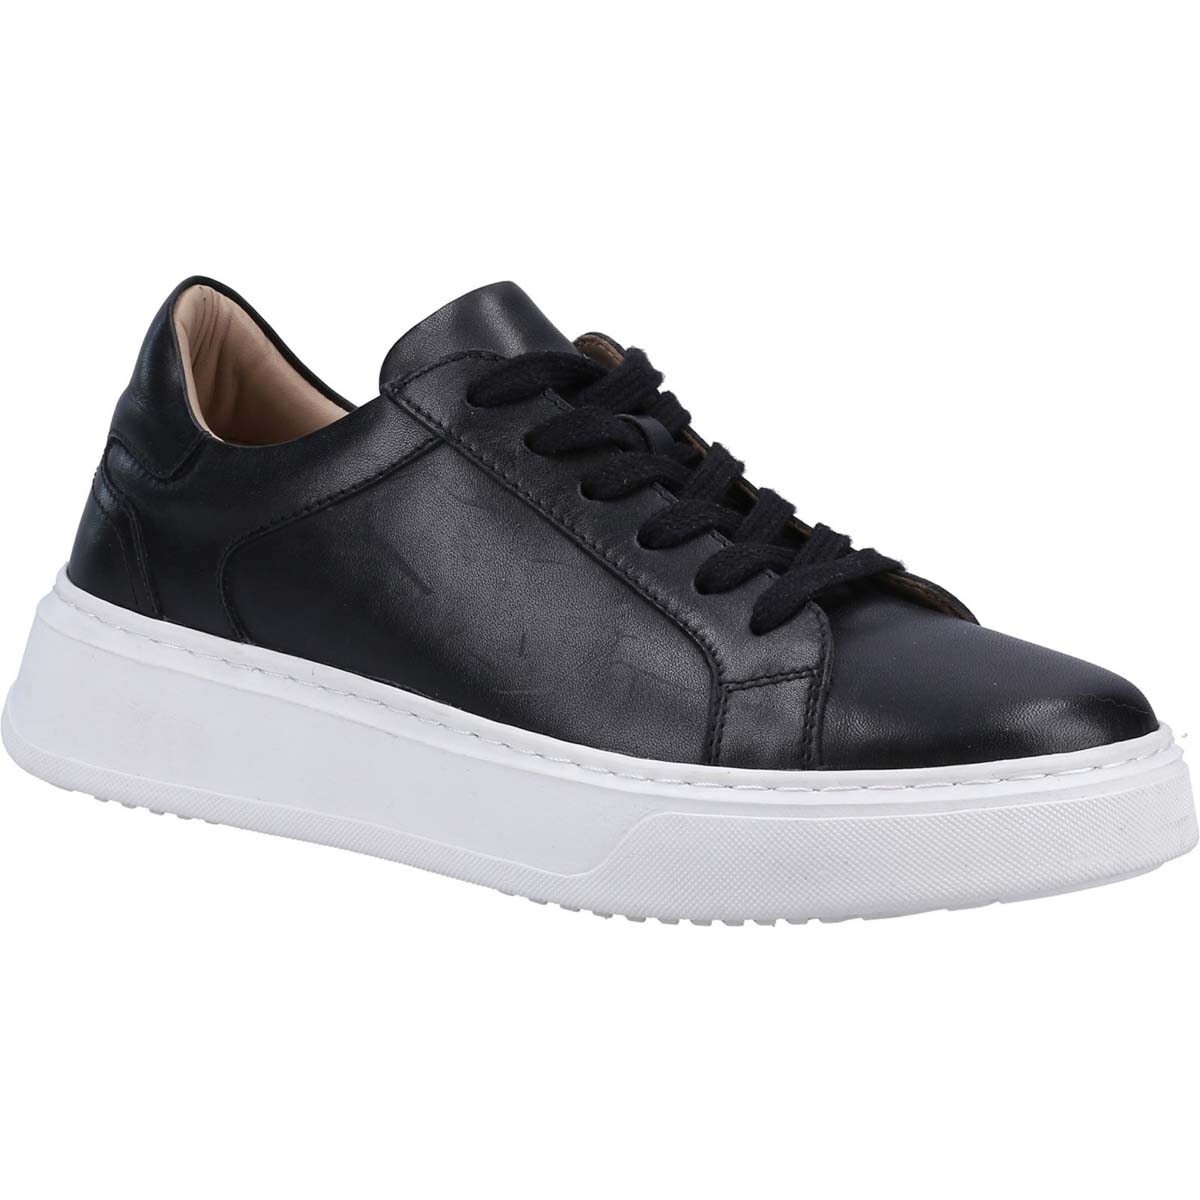 Hush Puppies Camille Black Womens trainers 36580-68191 in a Plain Leather in Size 3